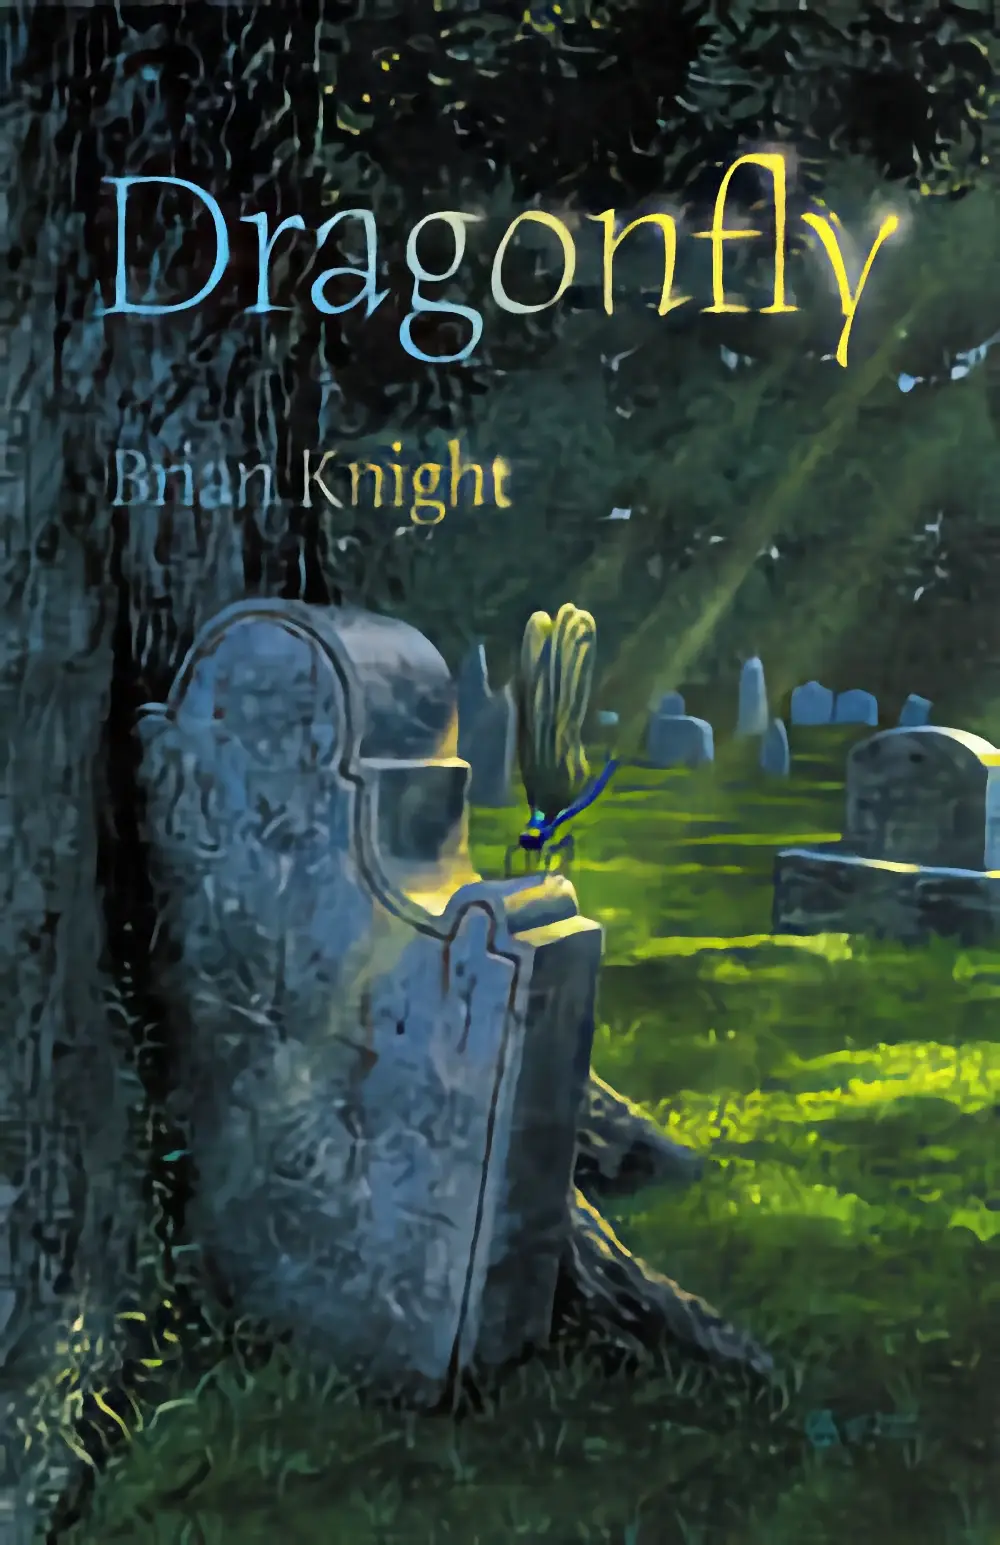 Dragonfly by Brian Knight